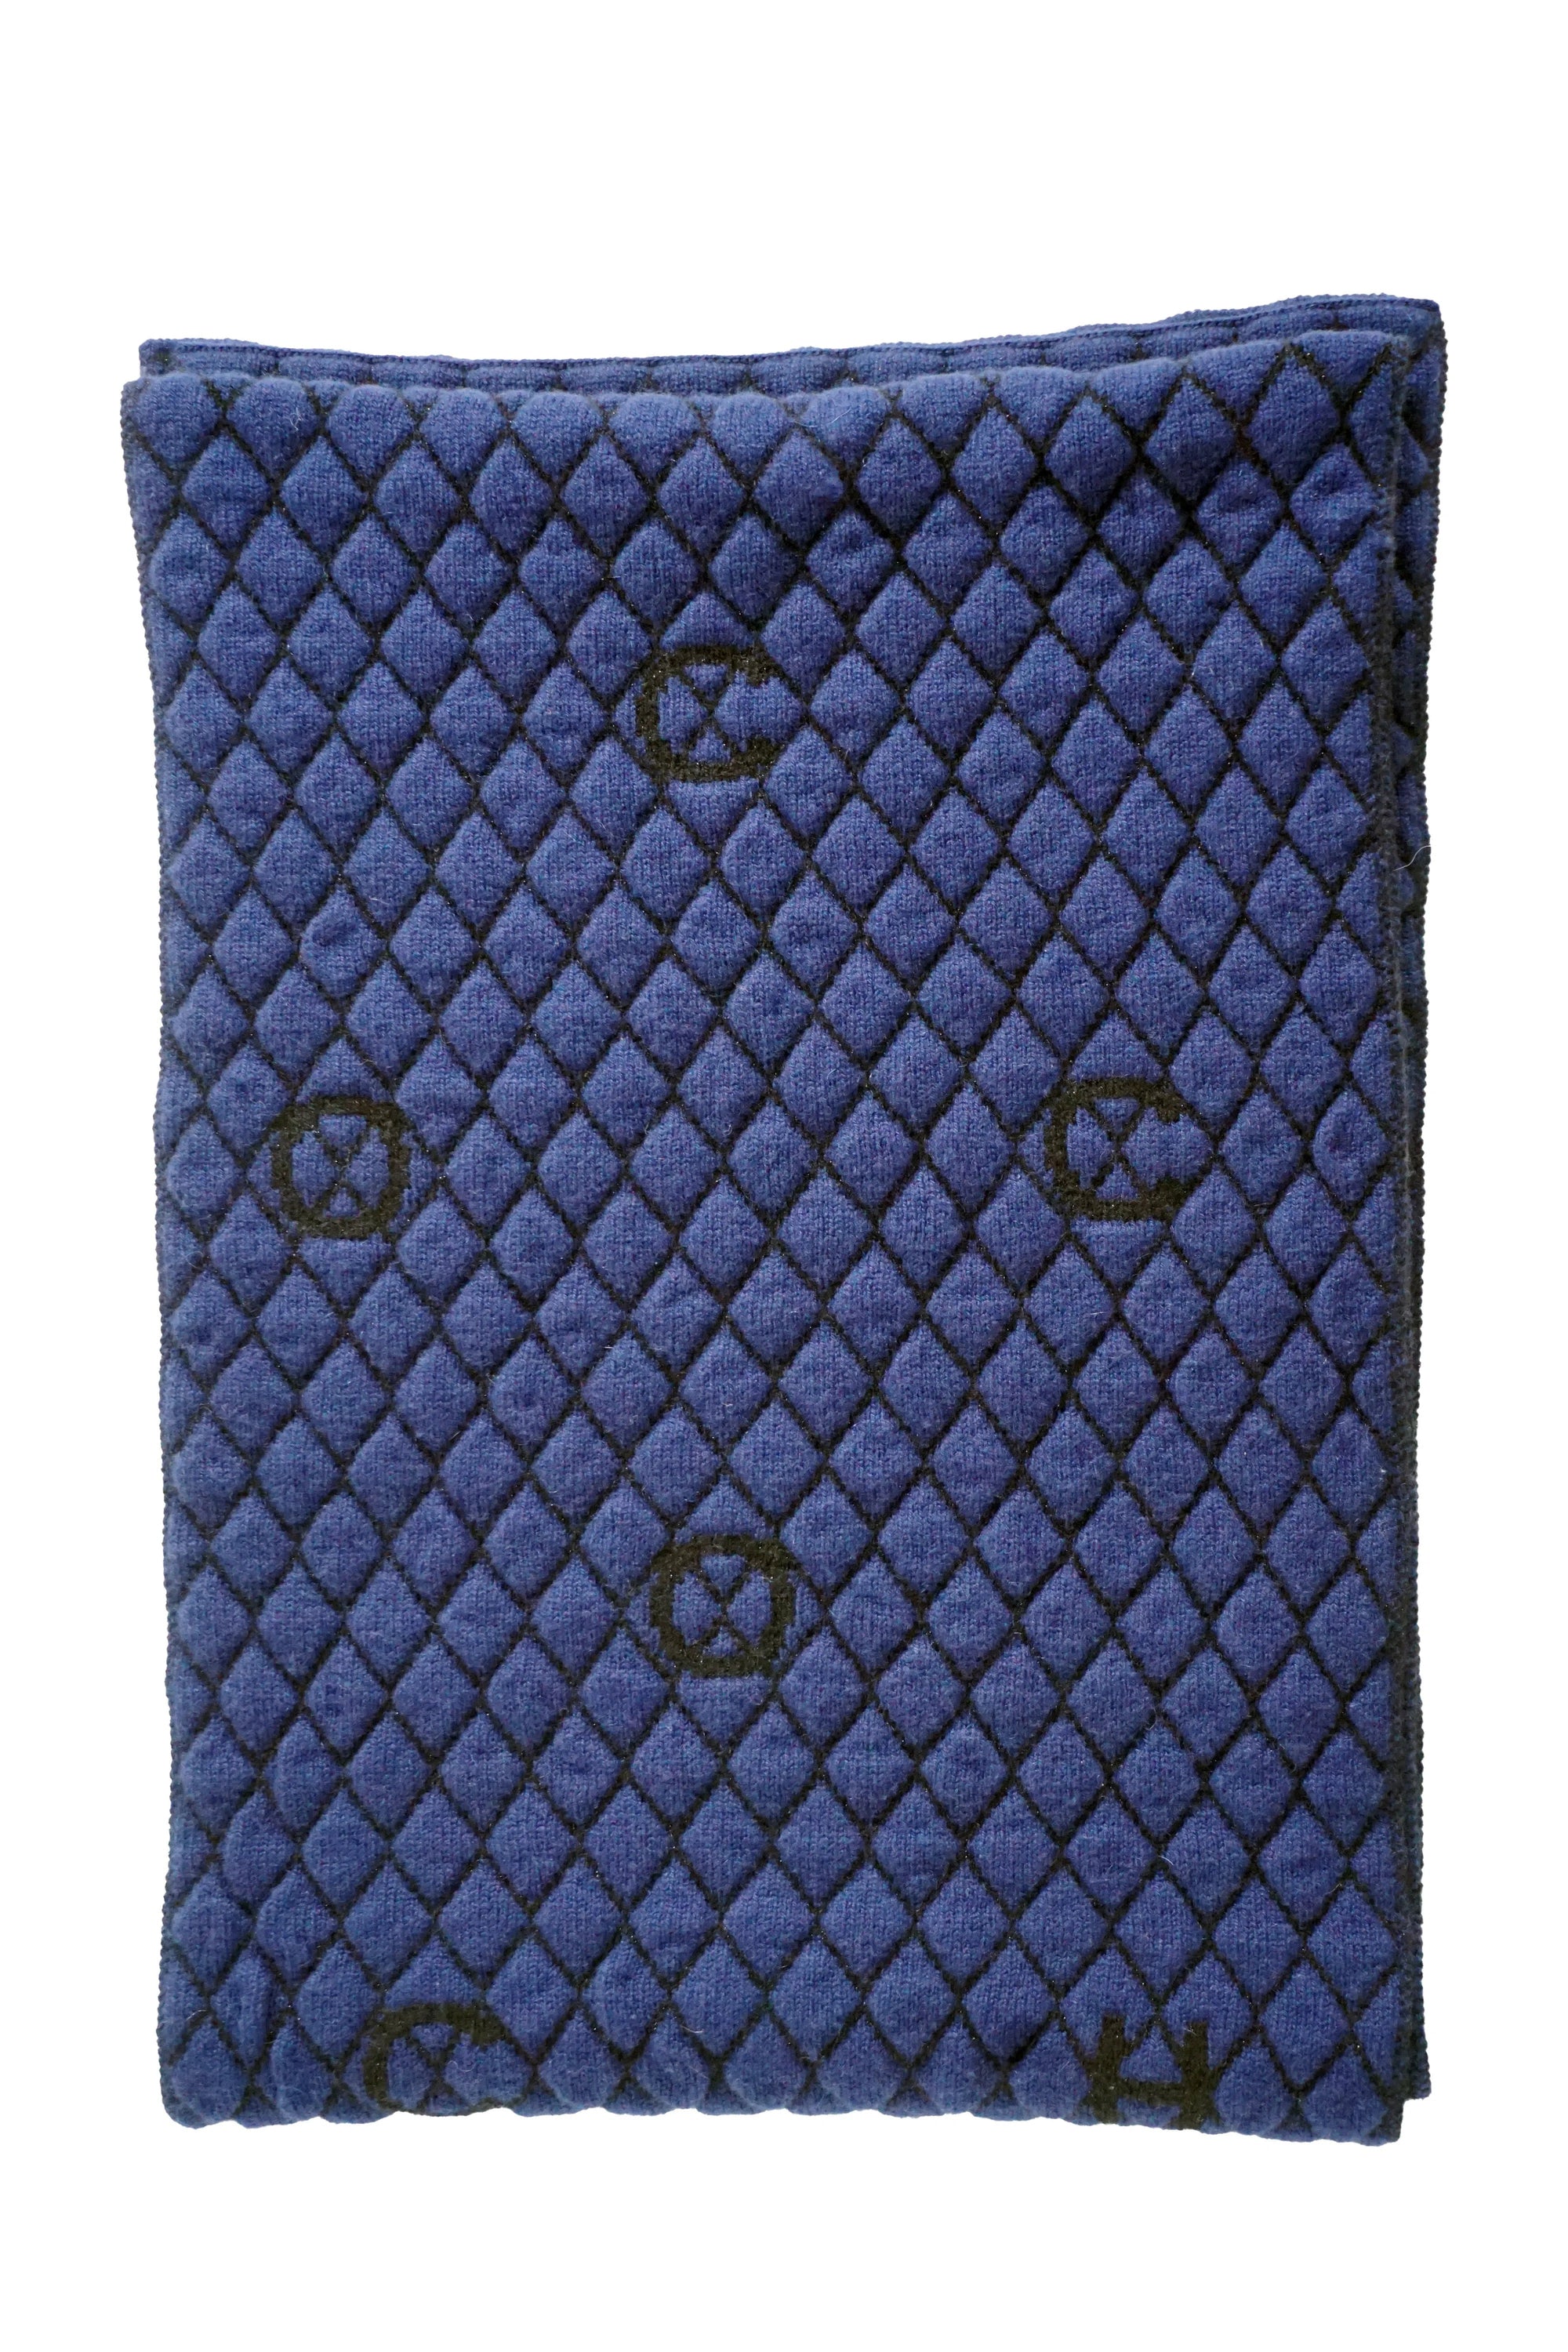 Chanel Quilted Design C H A N E L Letters Oblong Cashmere Scarf - Navy